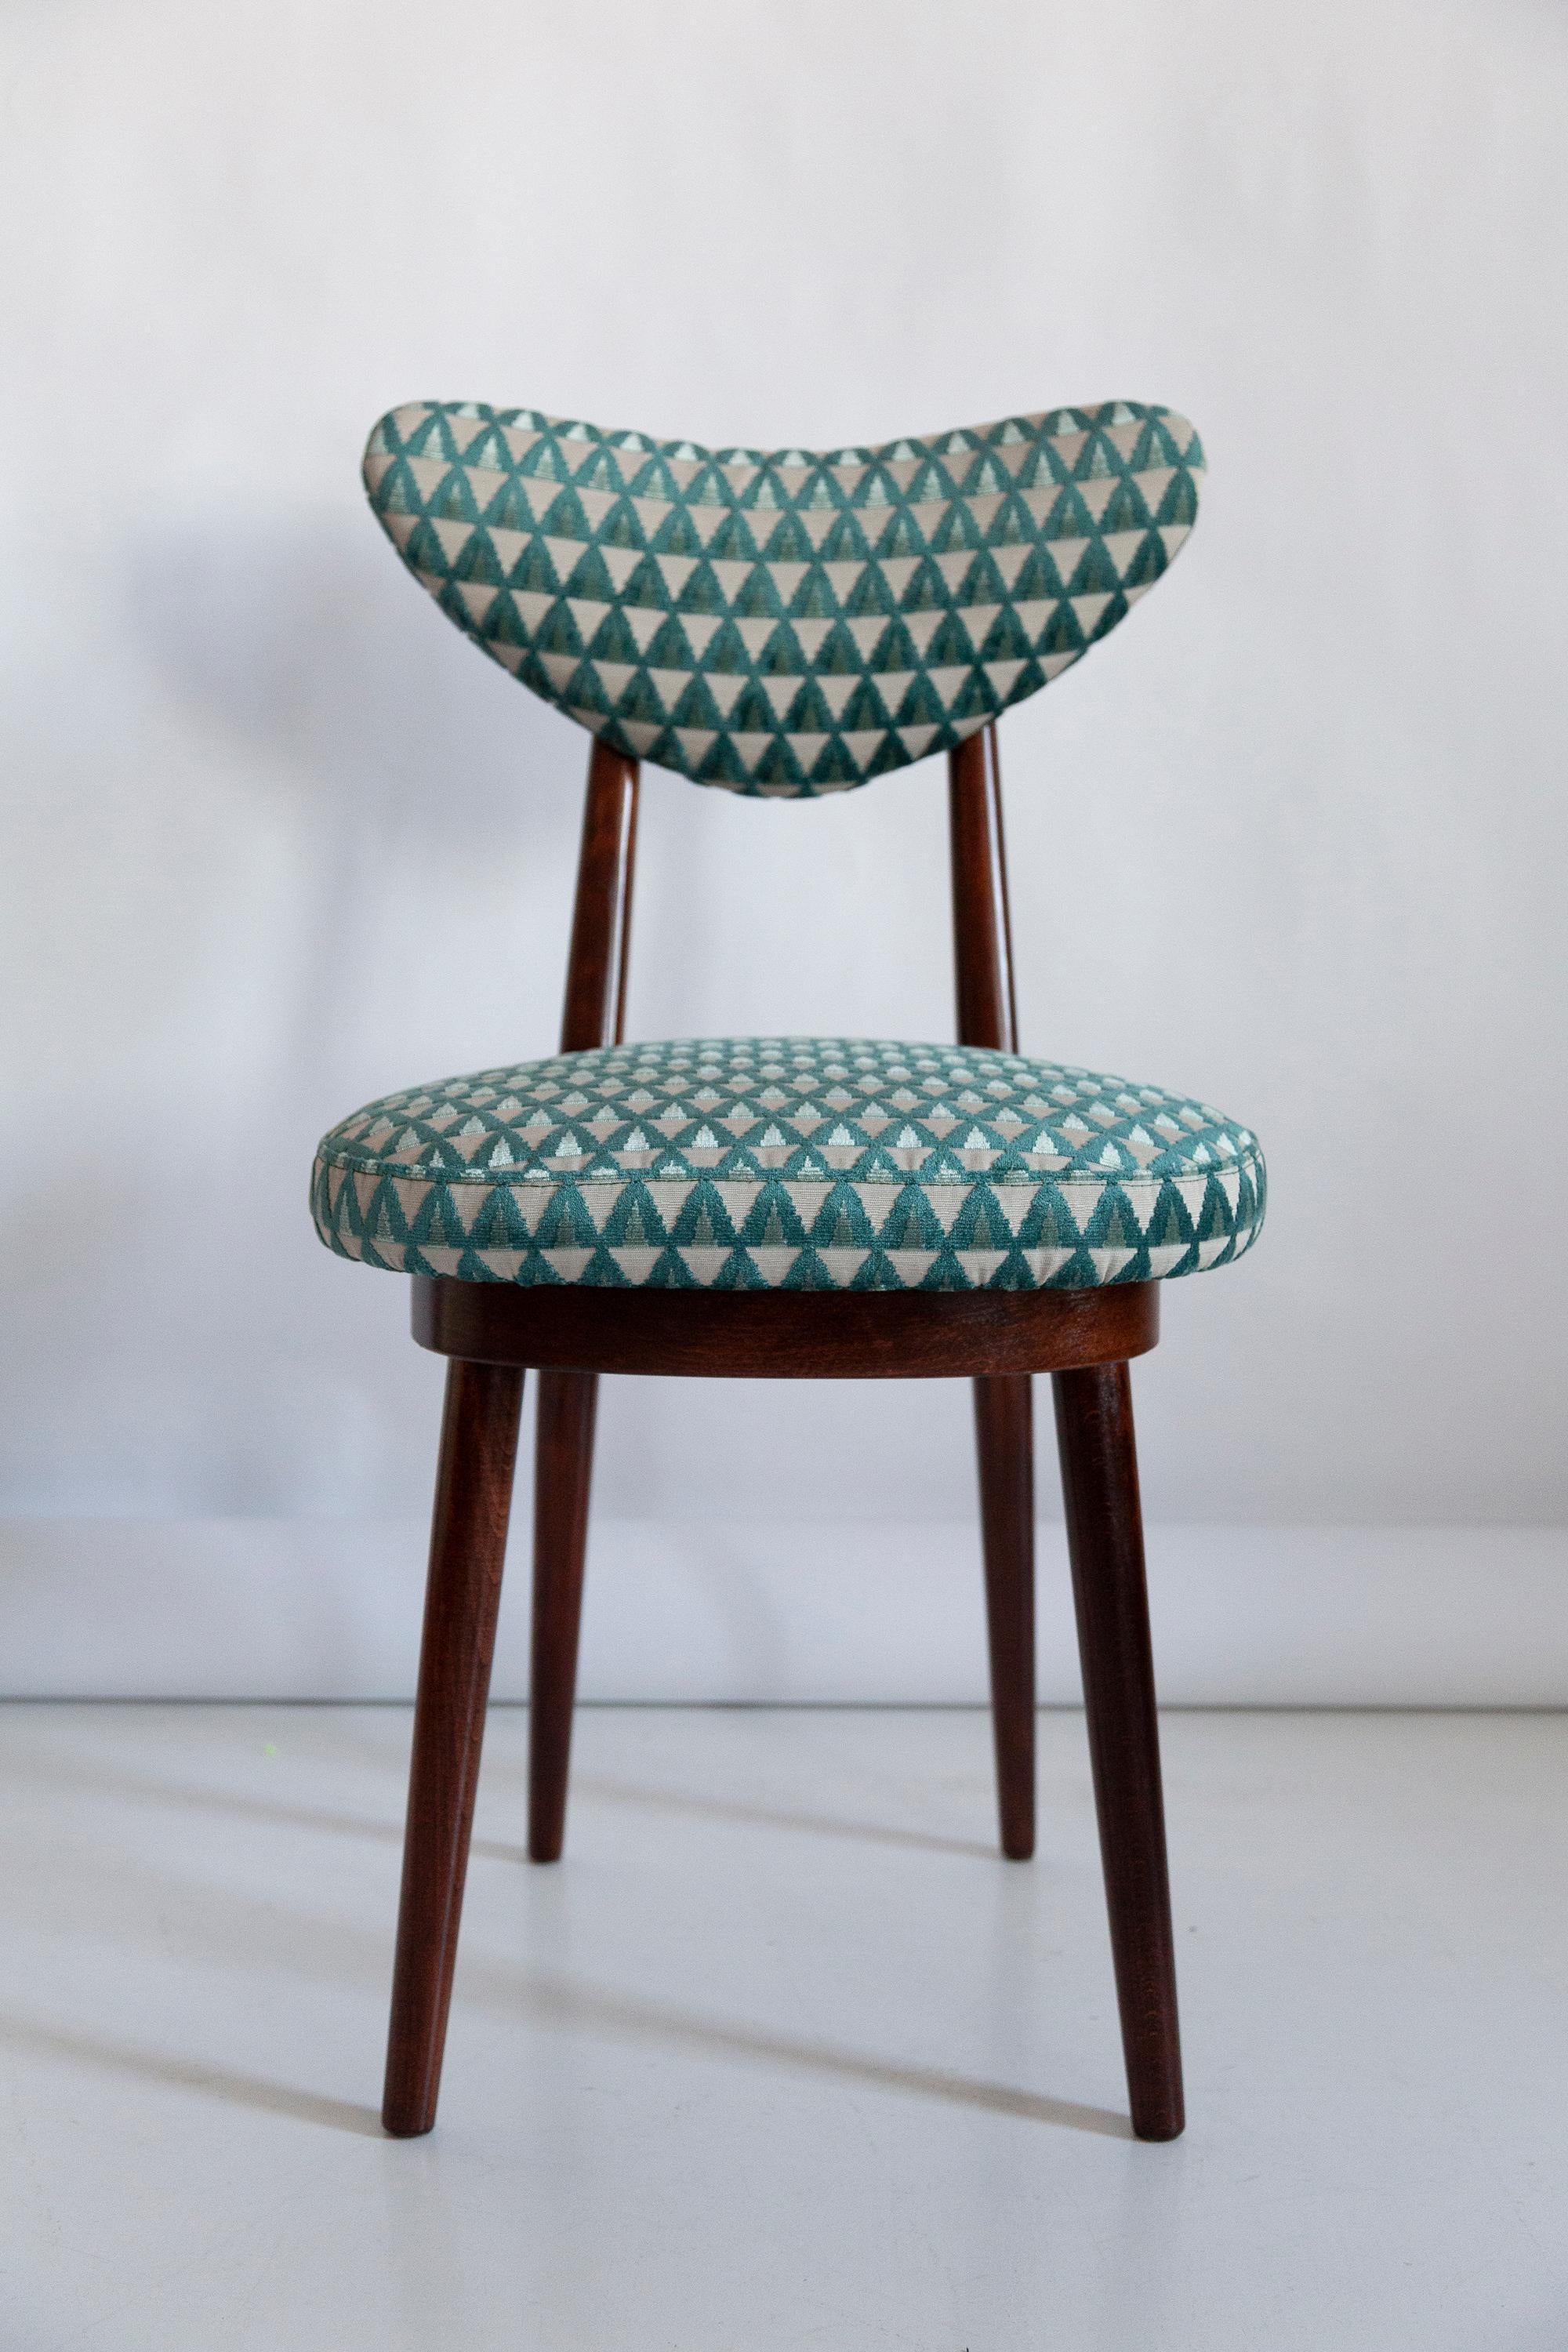 Set of Six Mid-Century Heart Chairs in Amuleto Green Velvet, Europe, 1960s For Sale 6